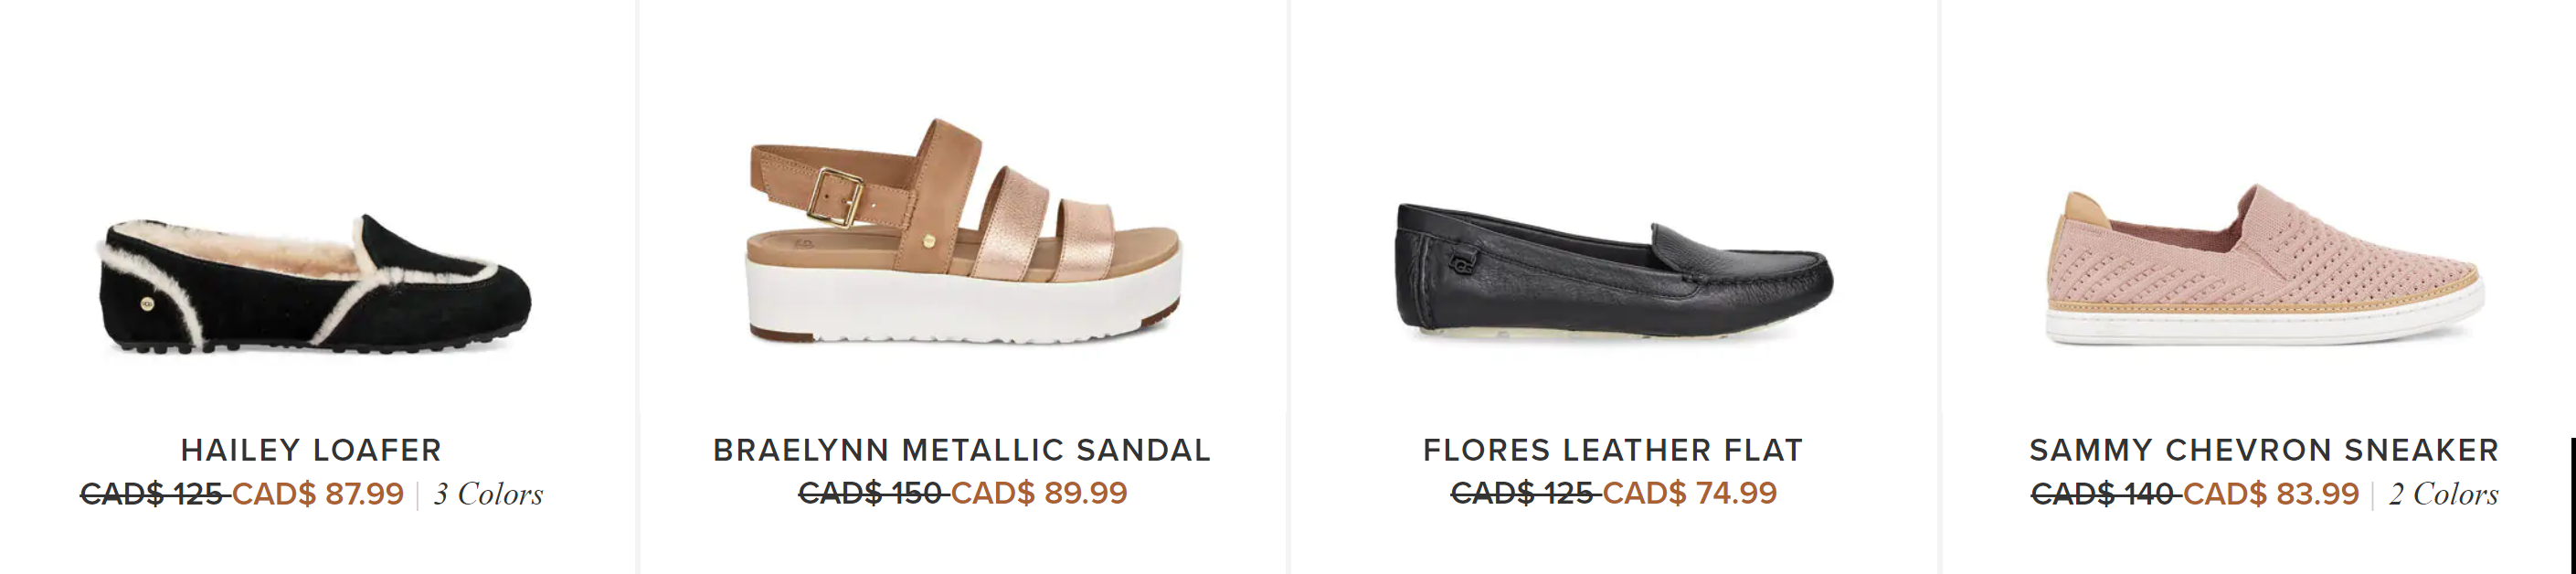 ugg-discount-area-as-low-as-53-percent-off-bags-of-sandals-and-snow-boots-are-available-2020-8-5